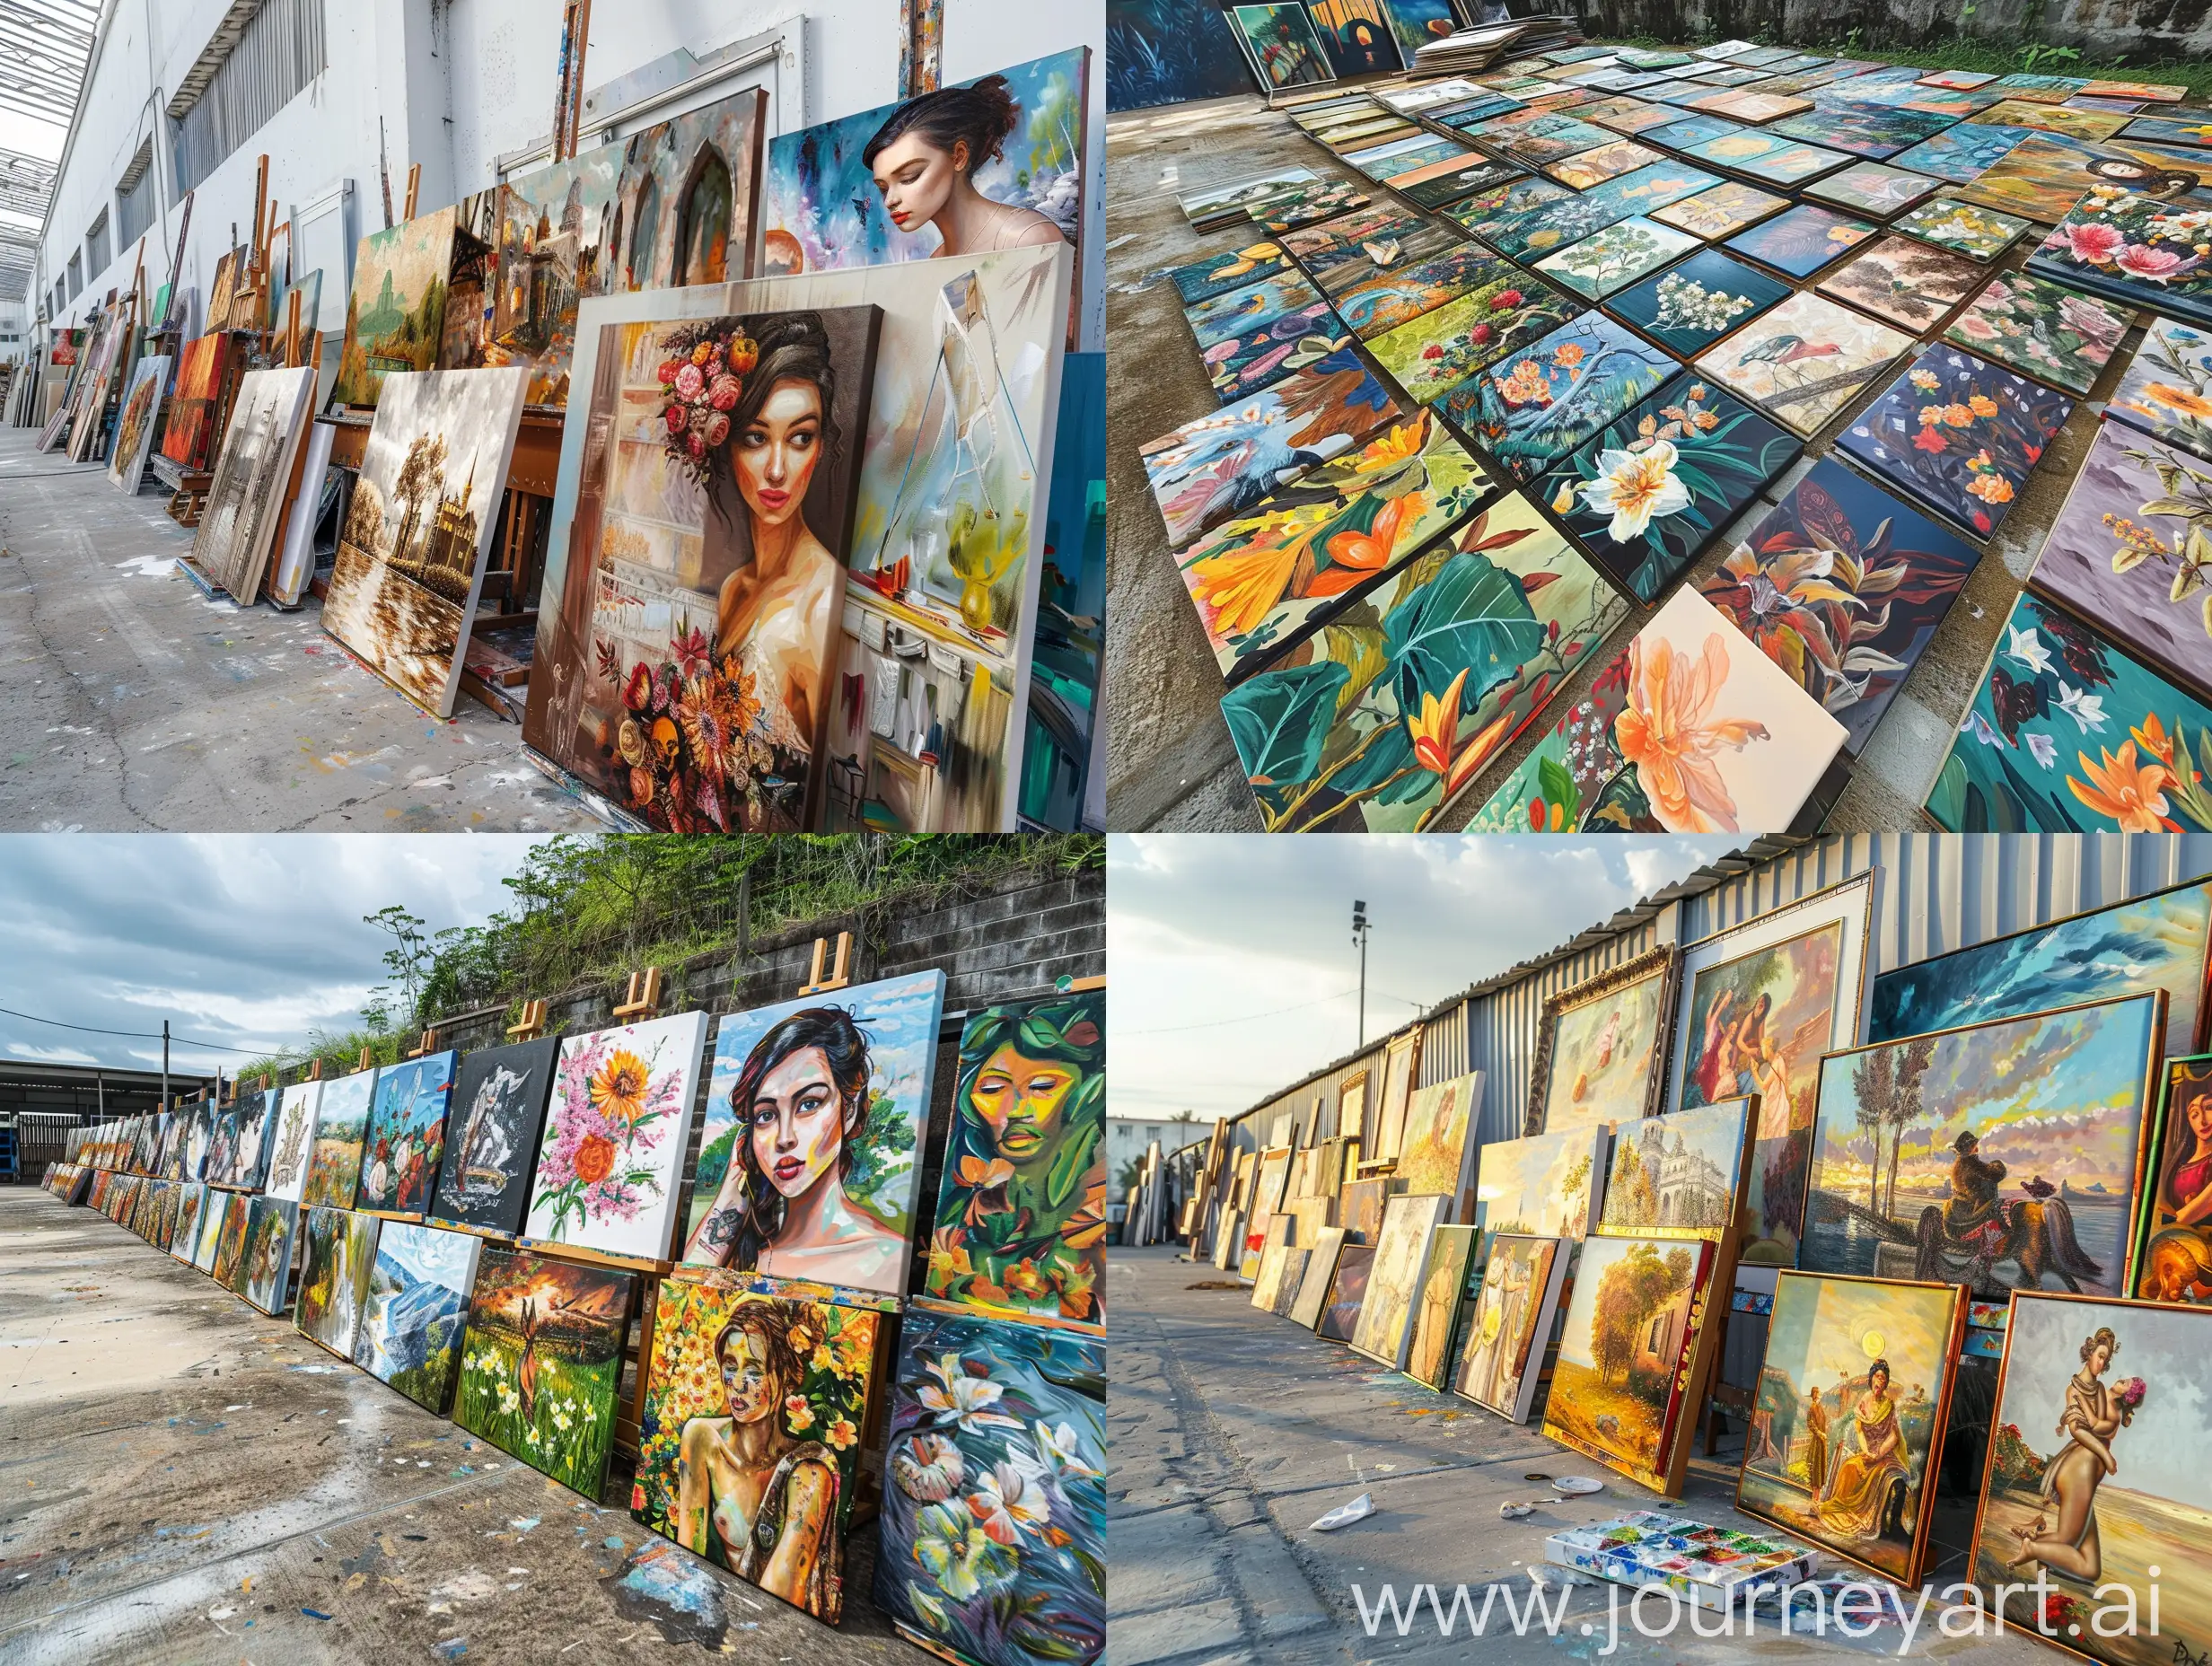 ((Super large oil painting studio))), (((Large quantity of handmade oil paintings))), ((Arranged in order)), ((Clean non-reflective cement ground)), (Realistic, 8K resolution image quality, panoramic)